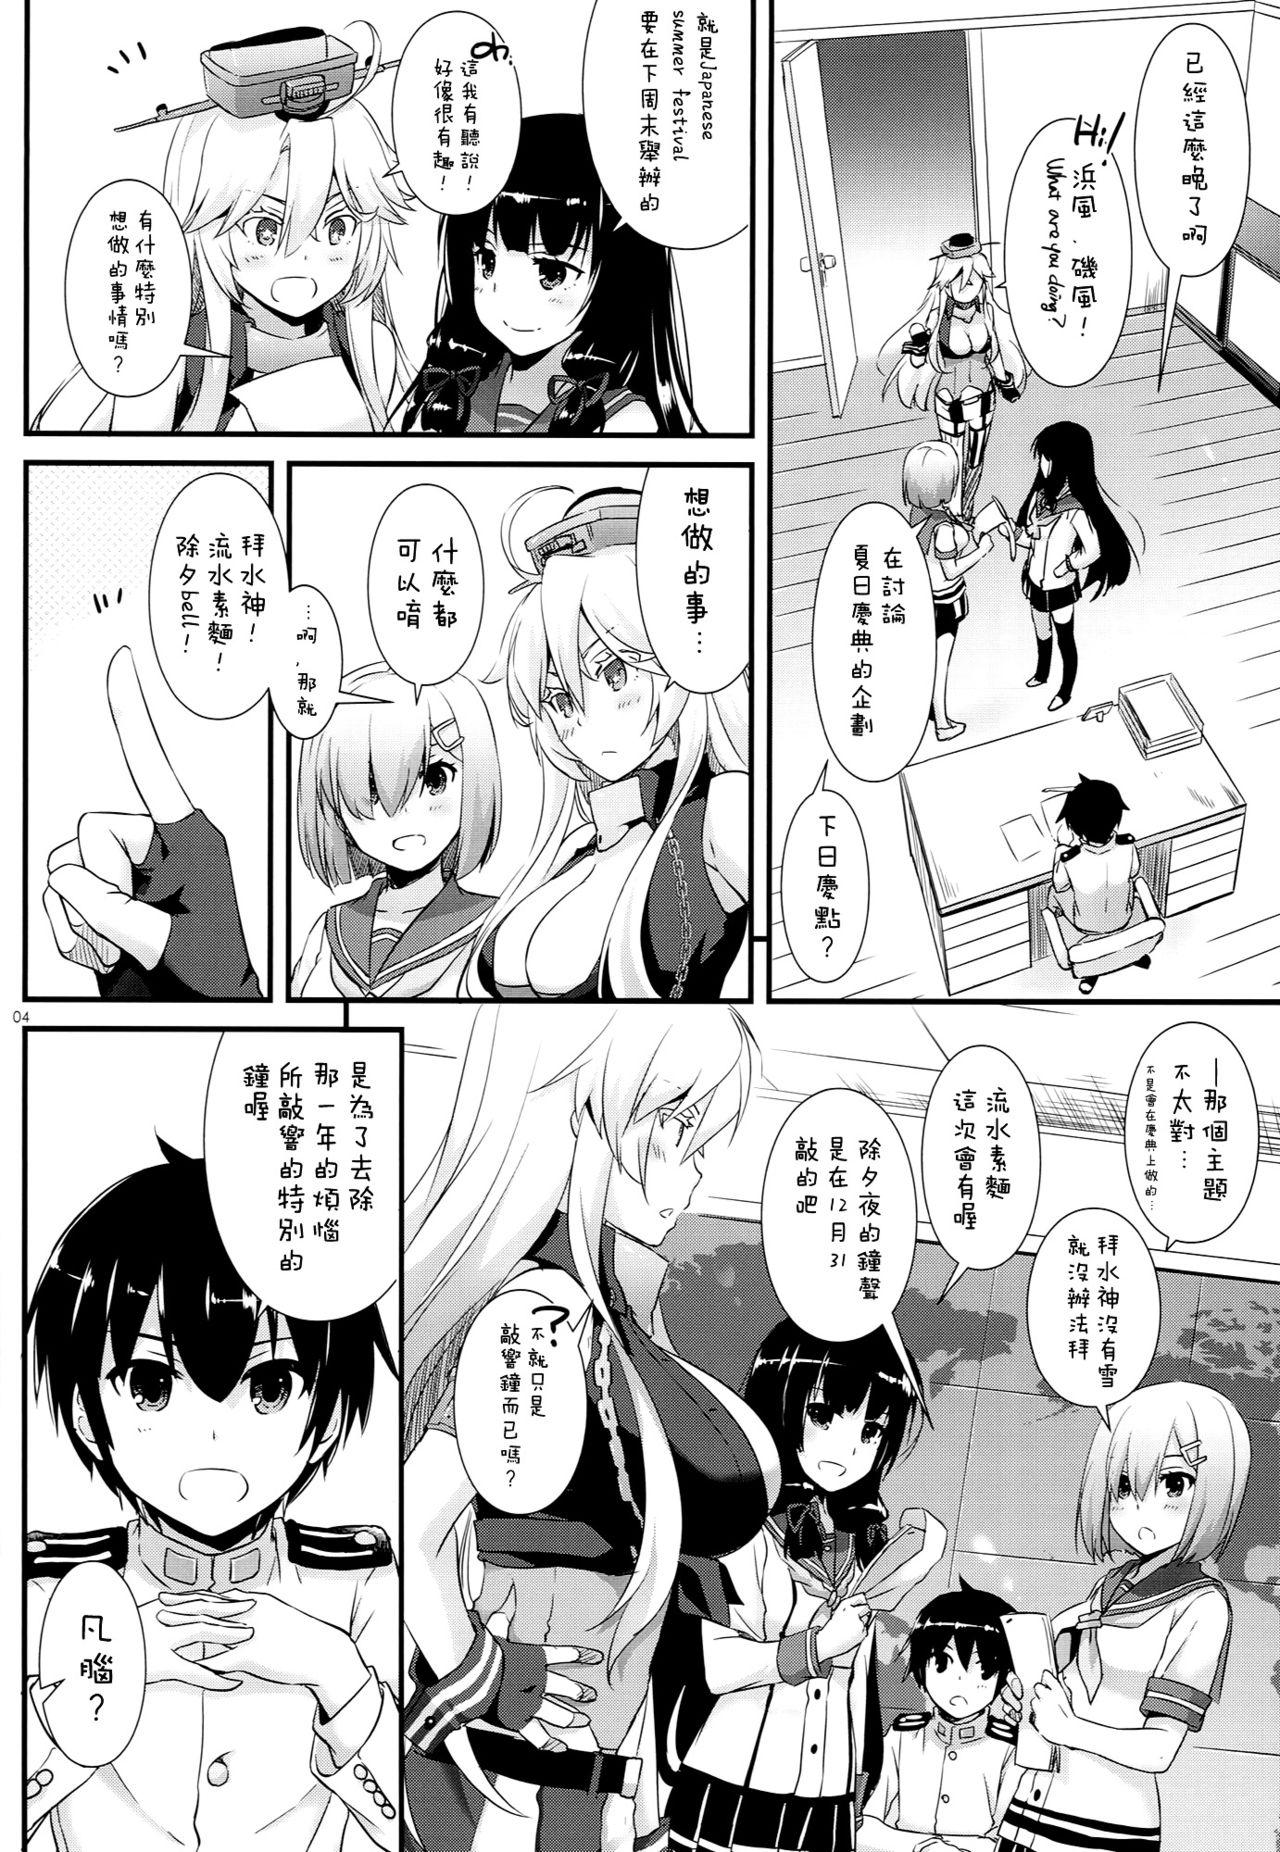 Gros Seins D.L. action 108 - Kantai collection Stepmom - Page 4